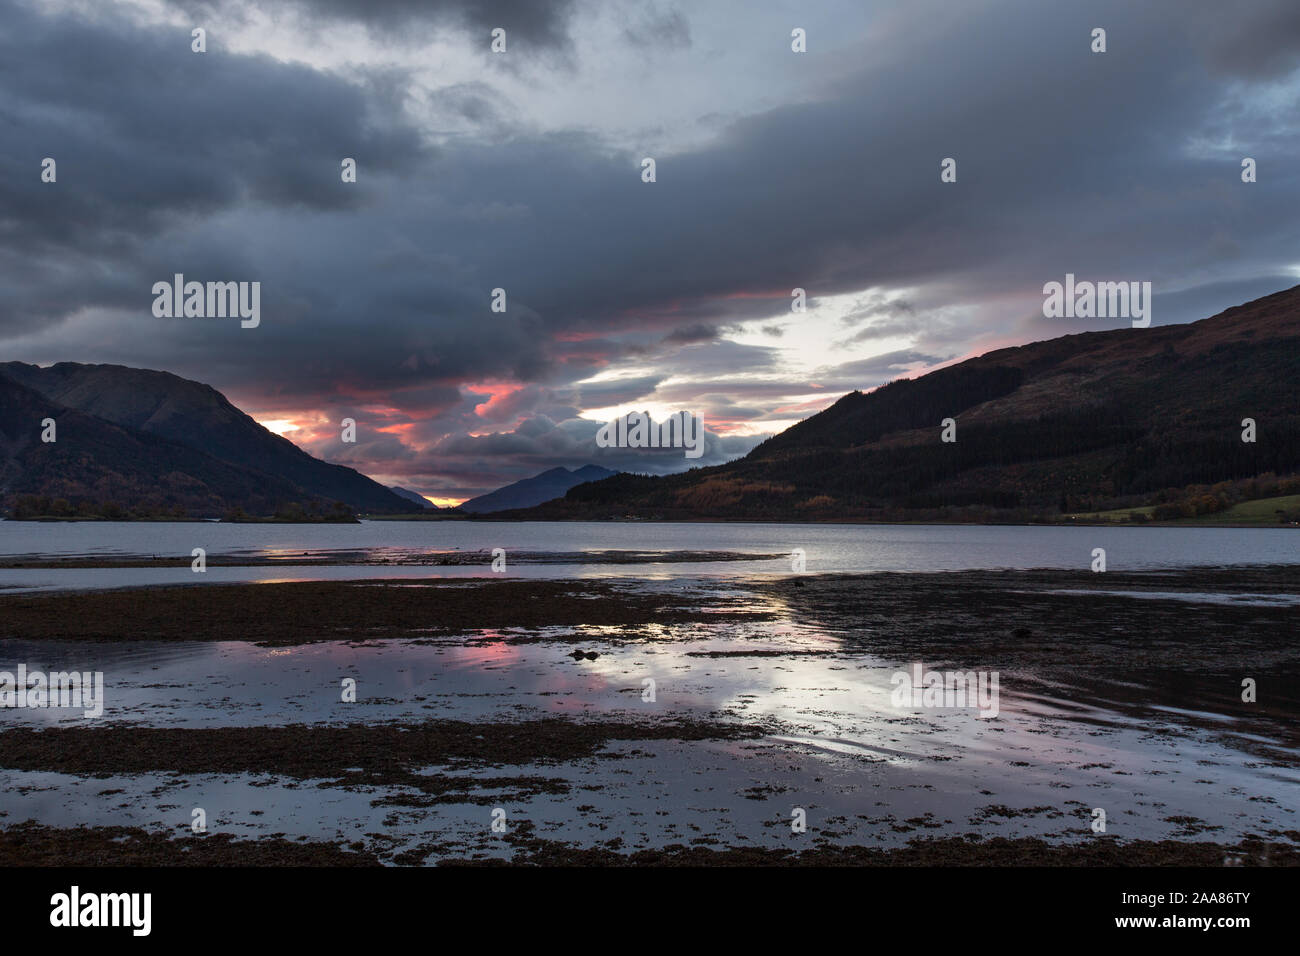 Area of Glencoe, Scotland. Picturesque dusk view of Loch Leven with North Ballachulish in the distant background. Stock Photo